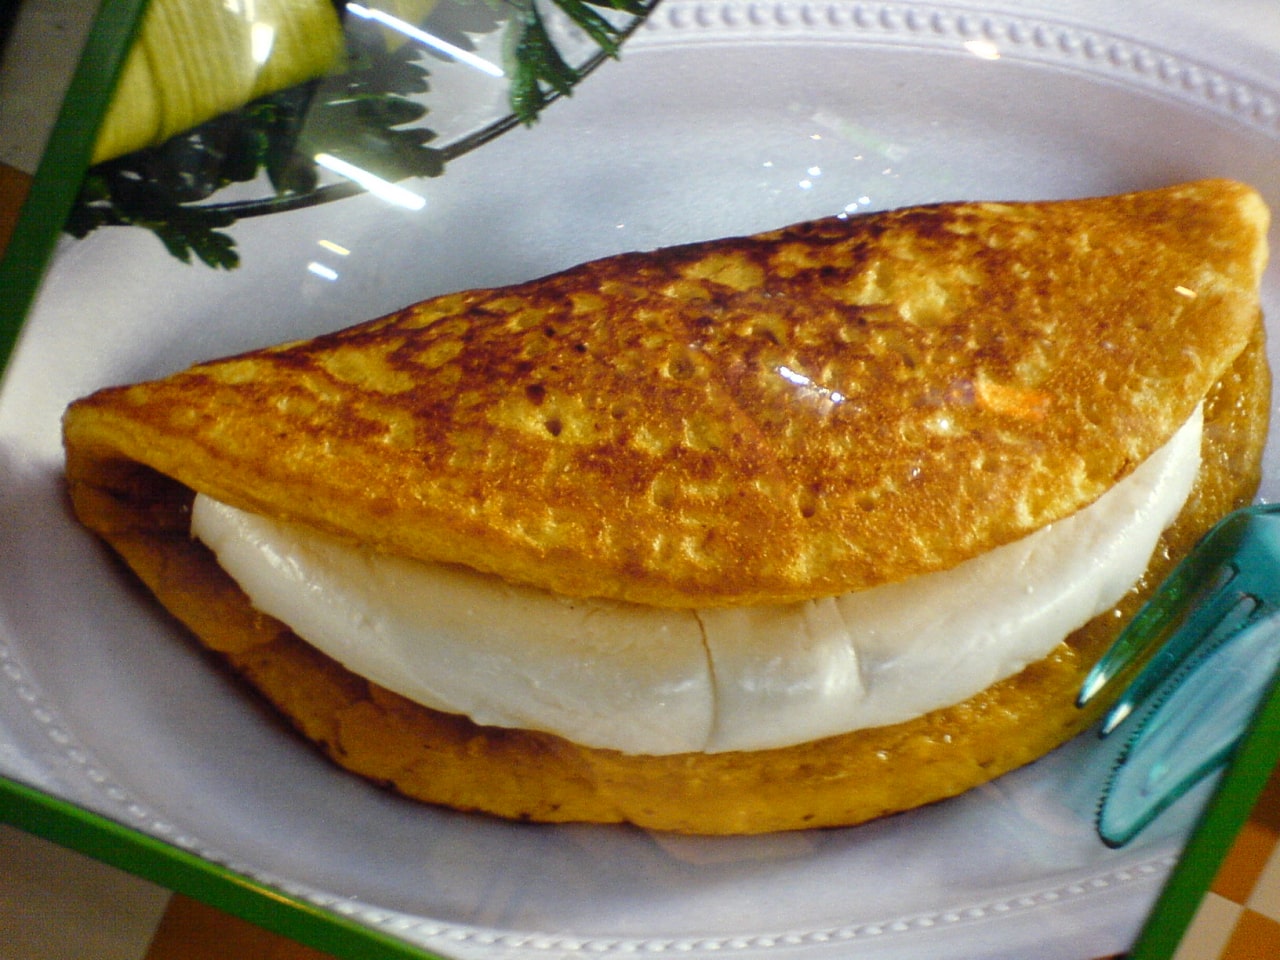 Where to eat the best cachapas in Caracas?